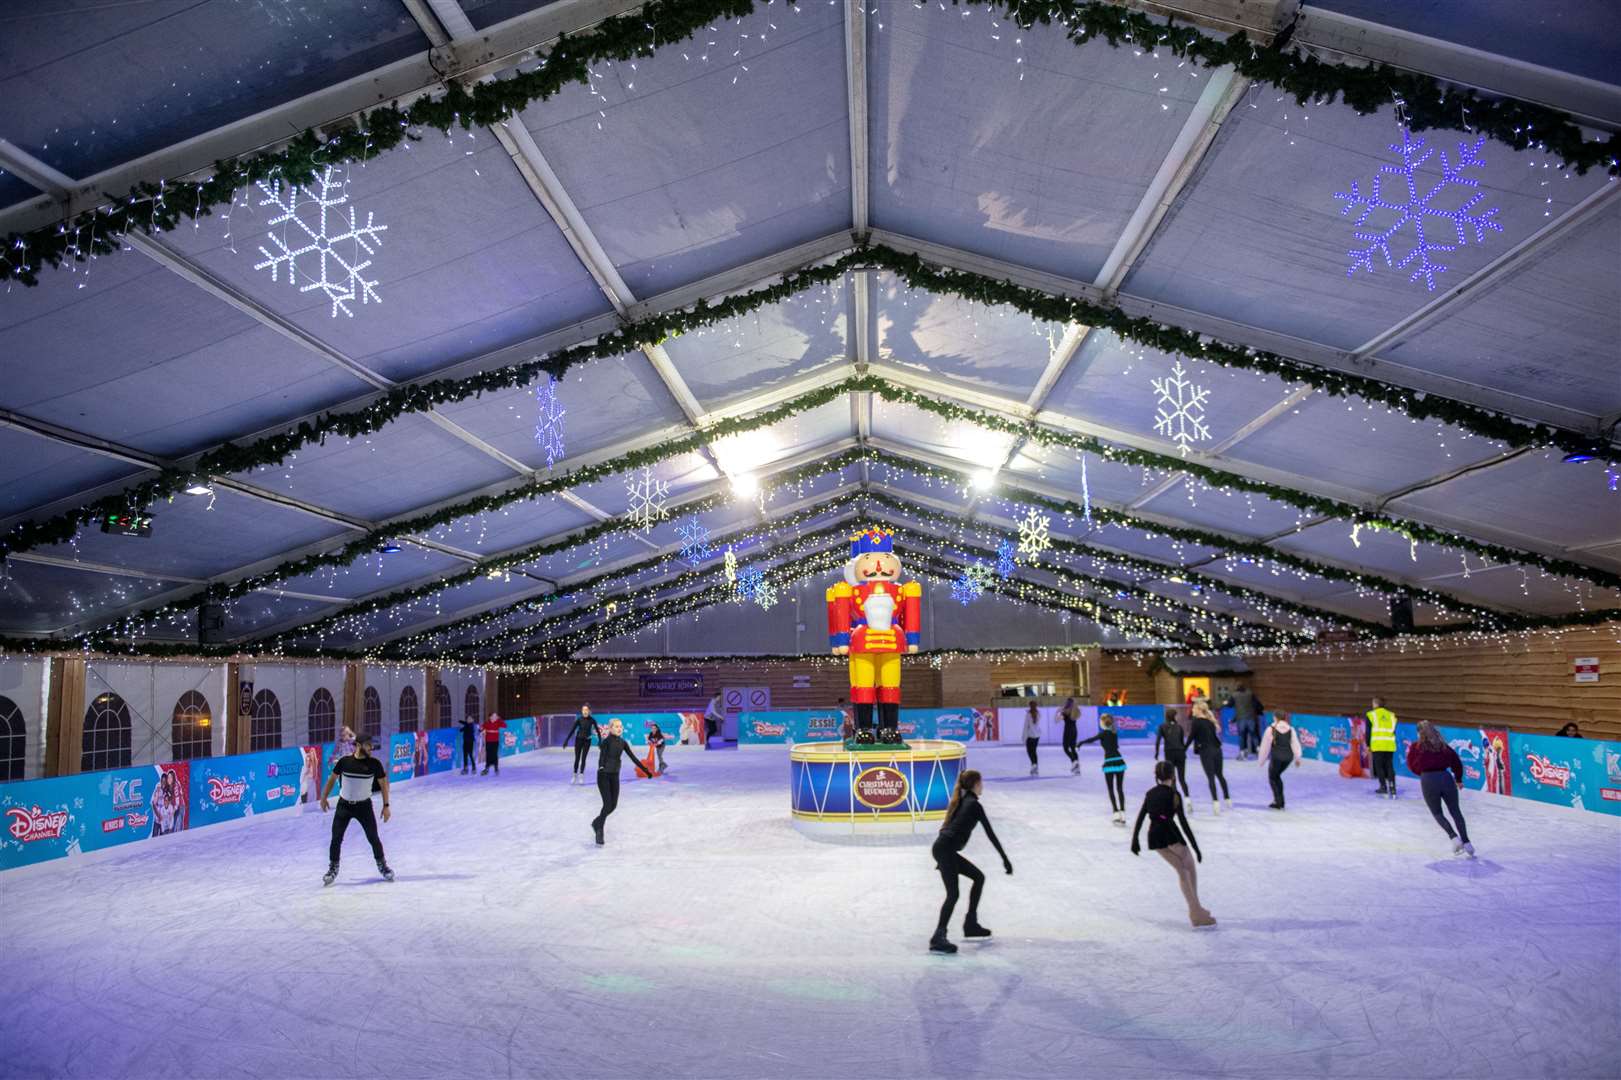 Bluewater has confirmed its ice rink for this year